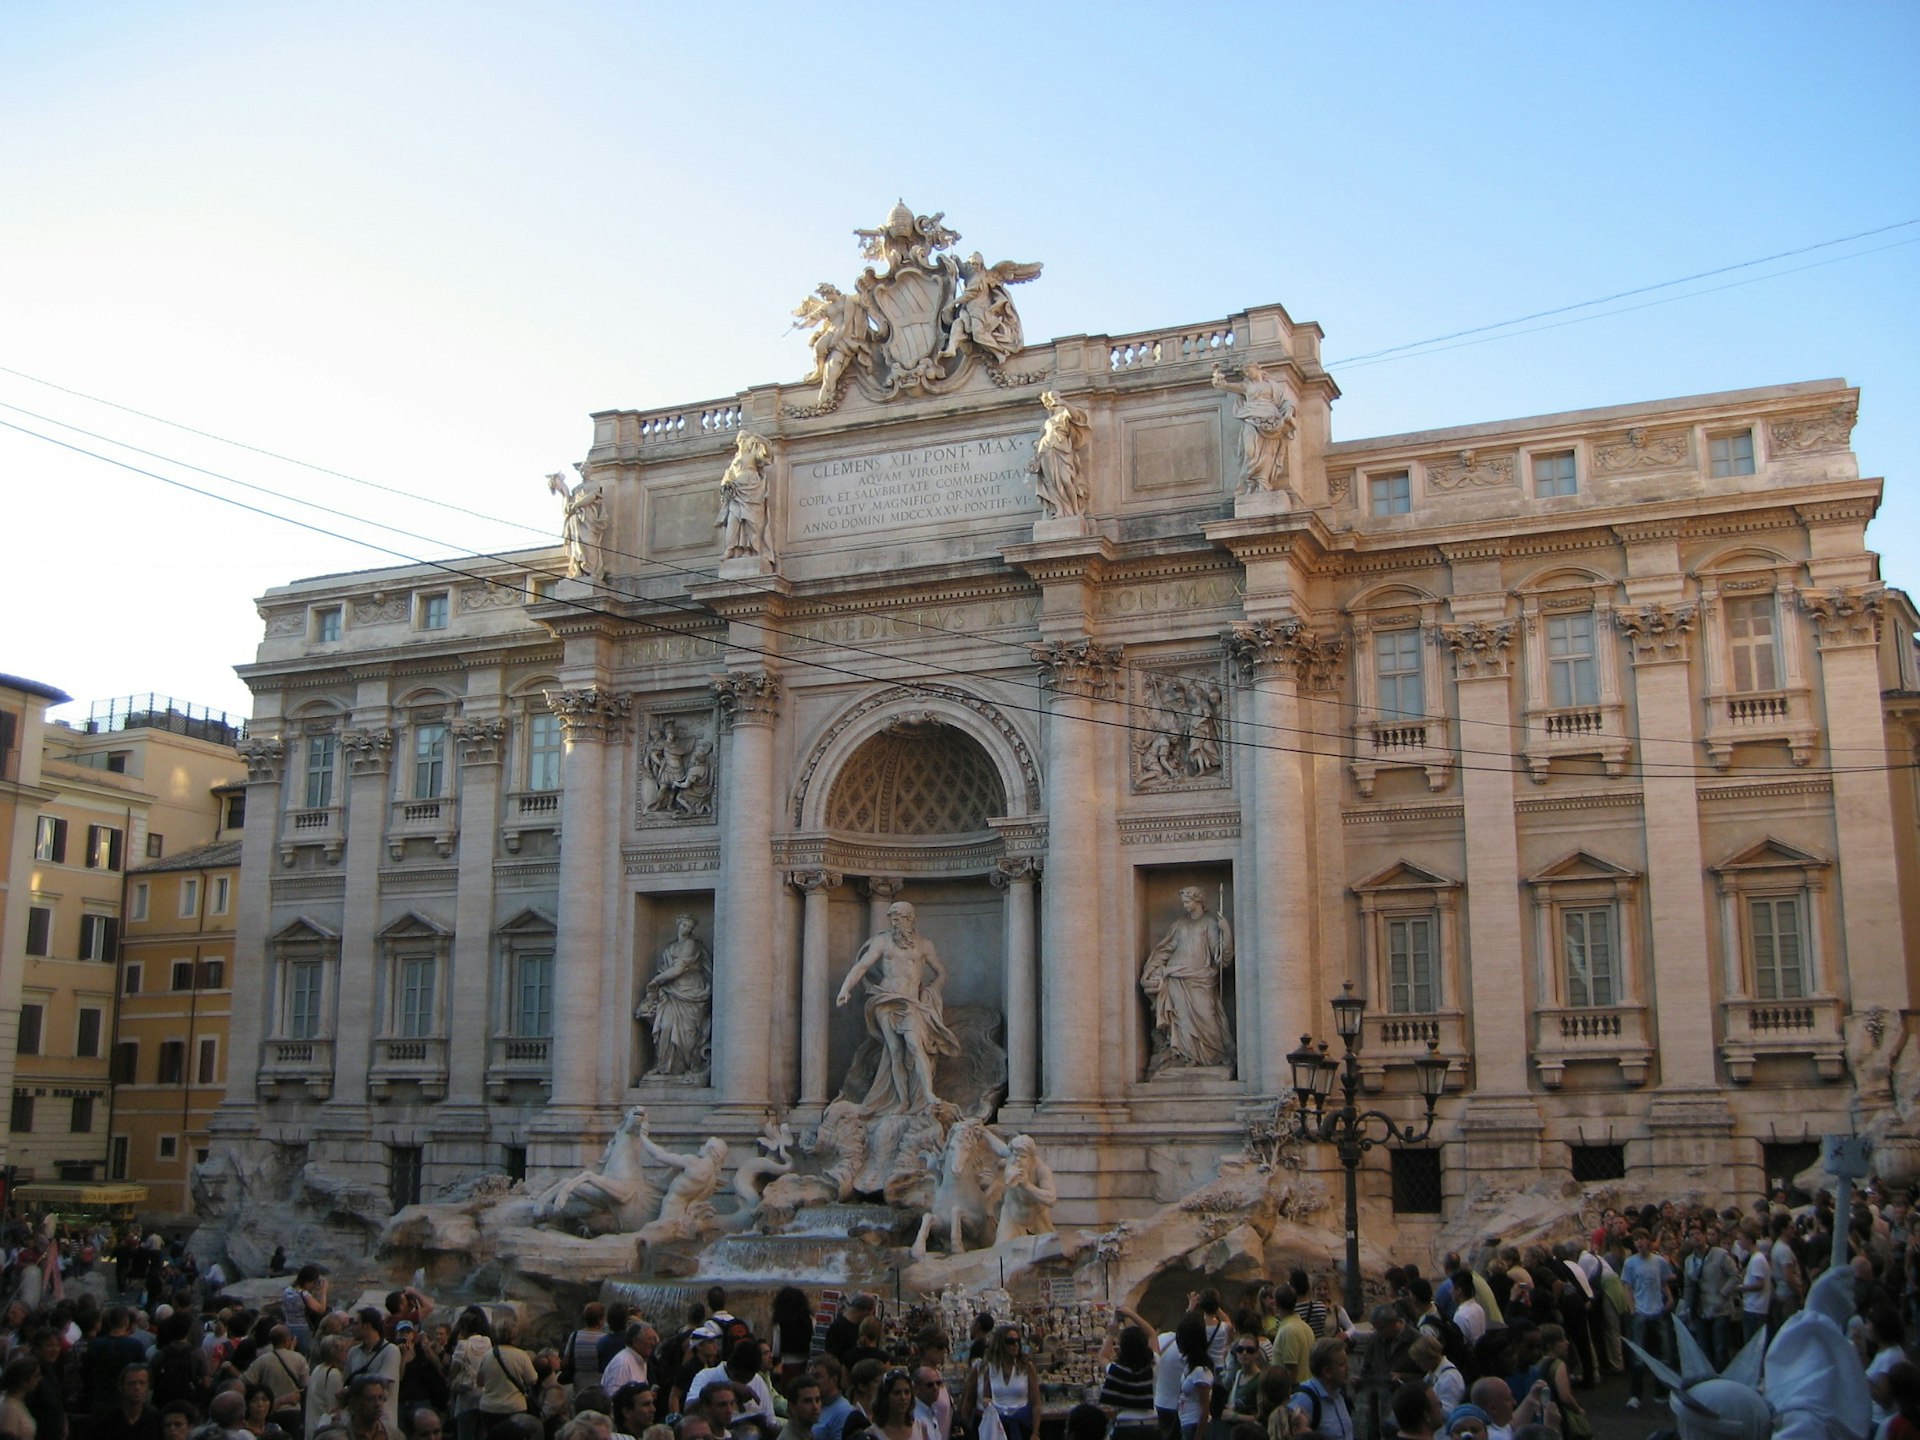 A crowd surrounds the intricate Trevi Fountain in Rome